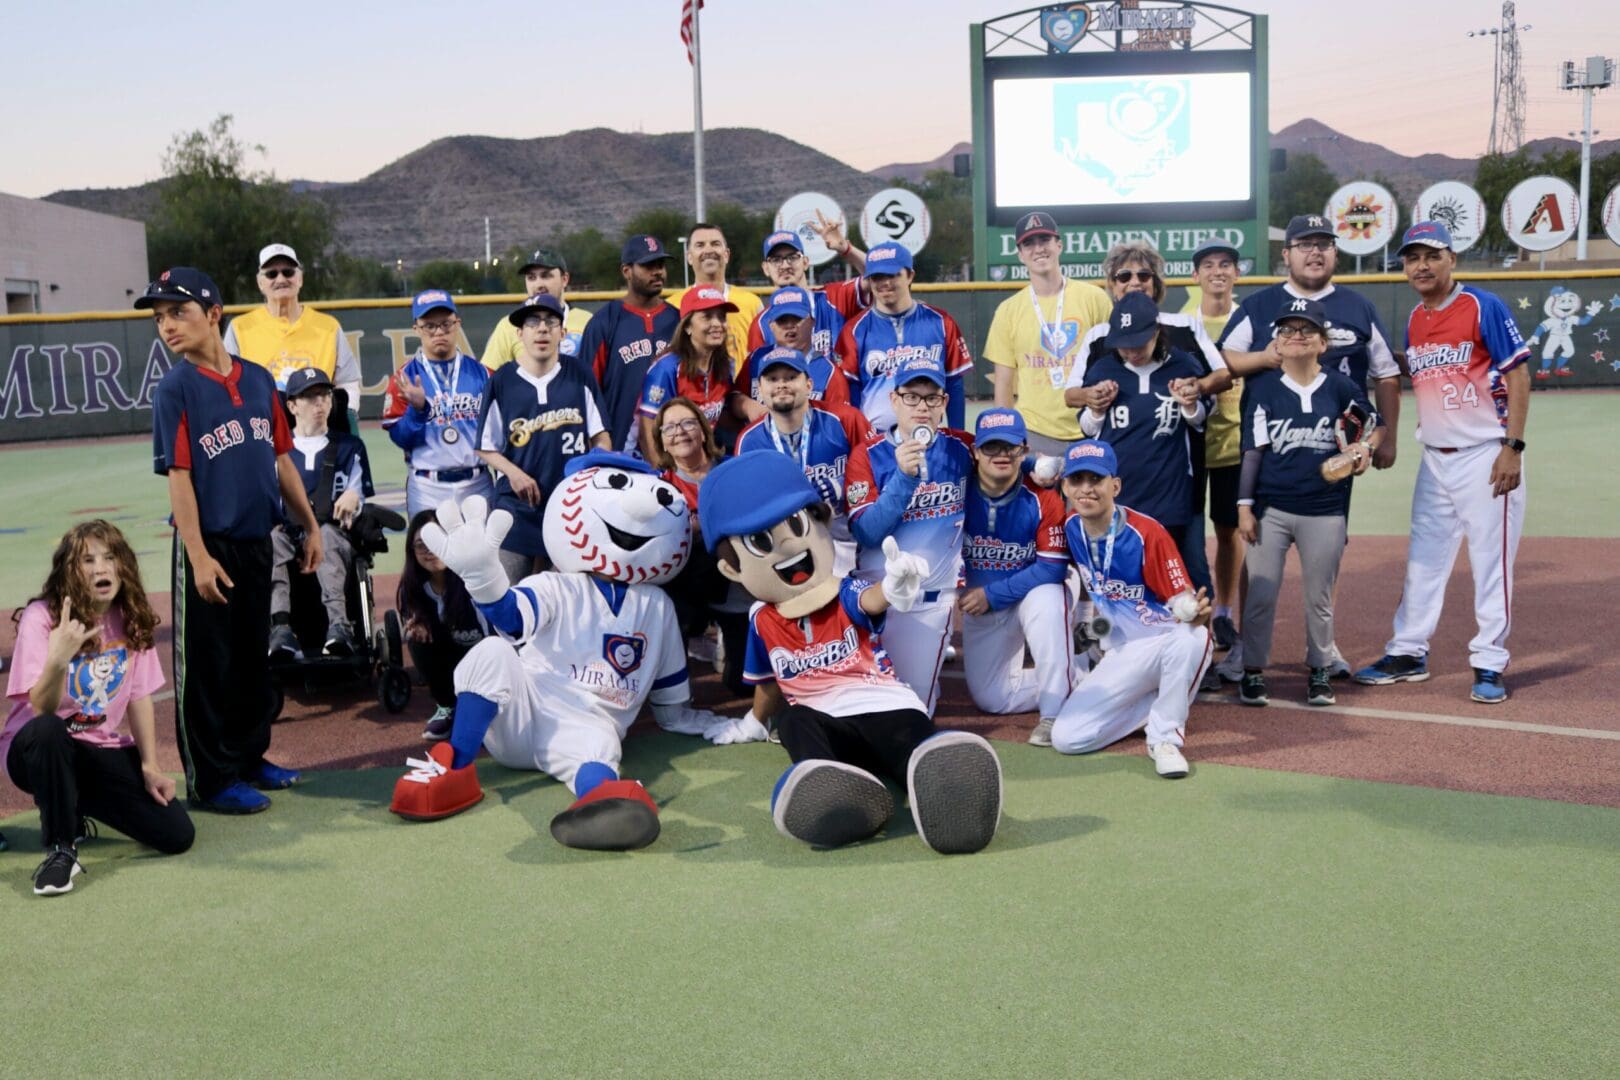 A group of baseball players and mascots posing for a photo.